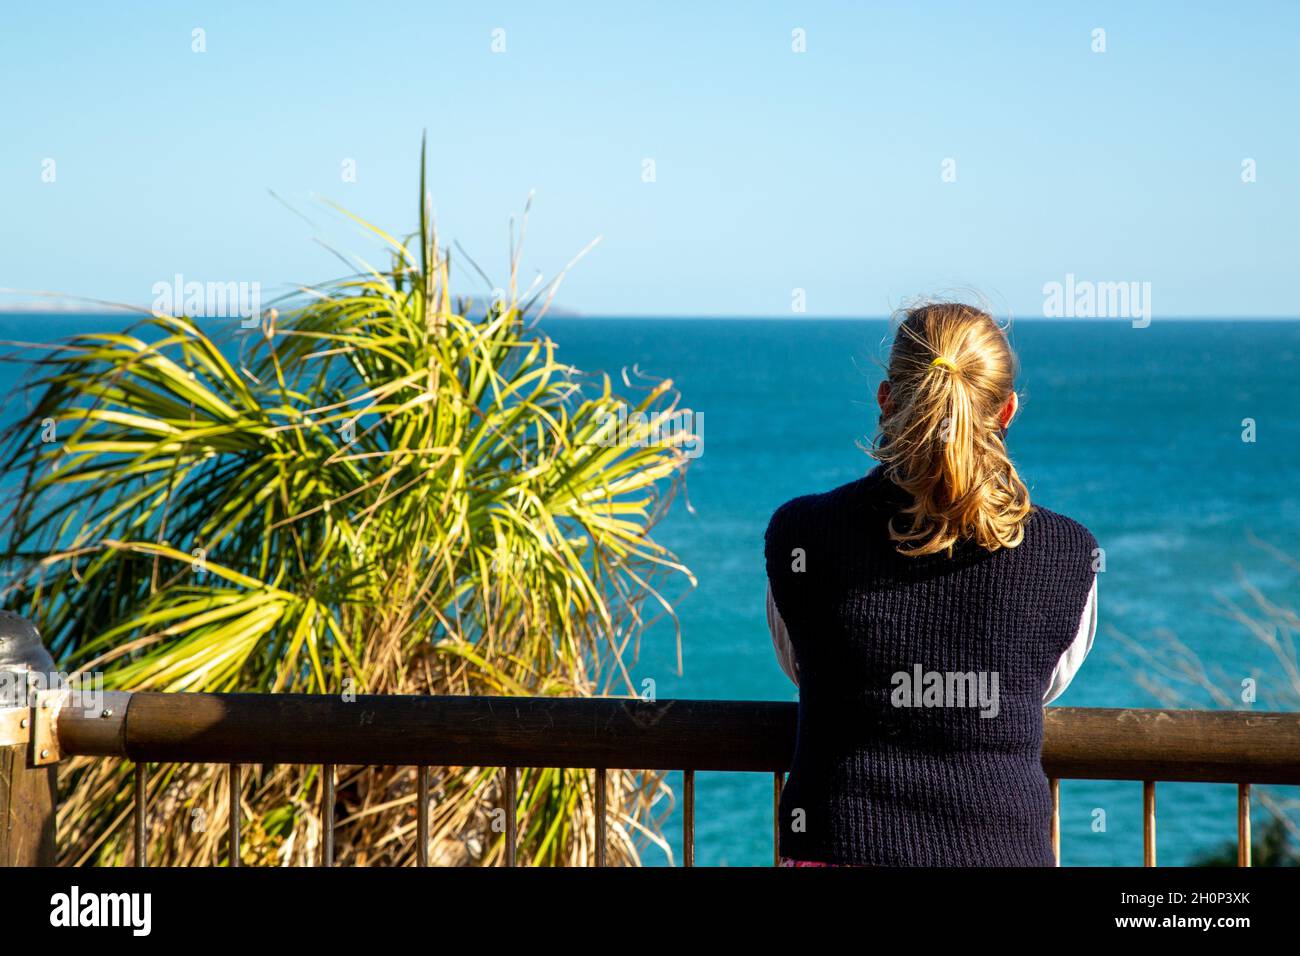 A fair haired lady pondering the ocean. Stock Photo